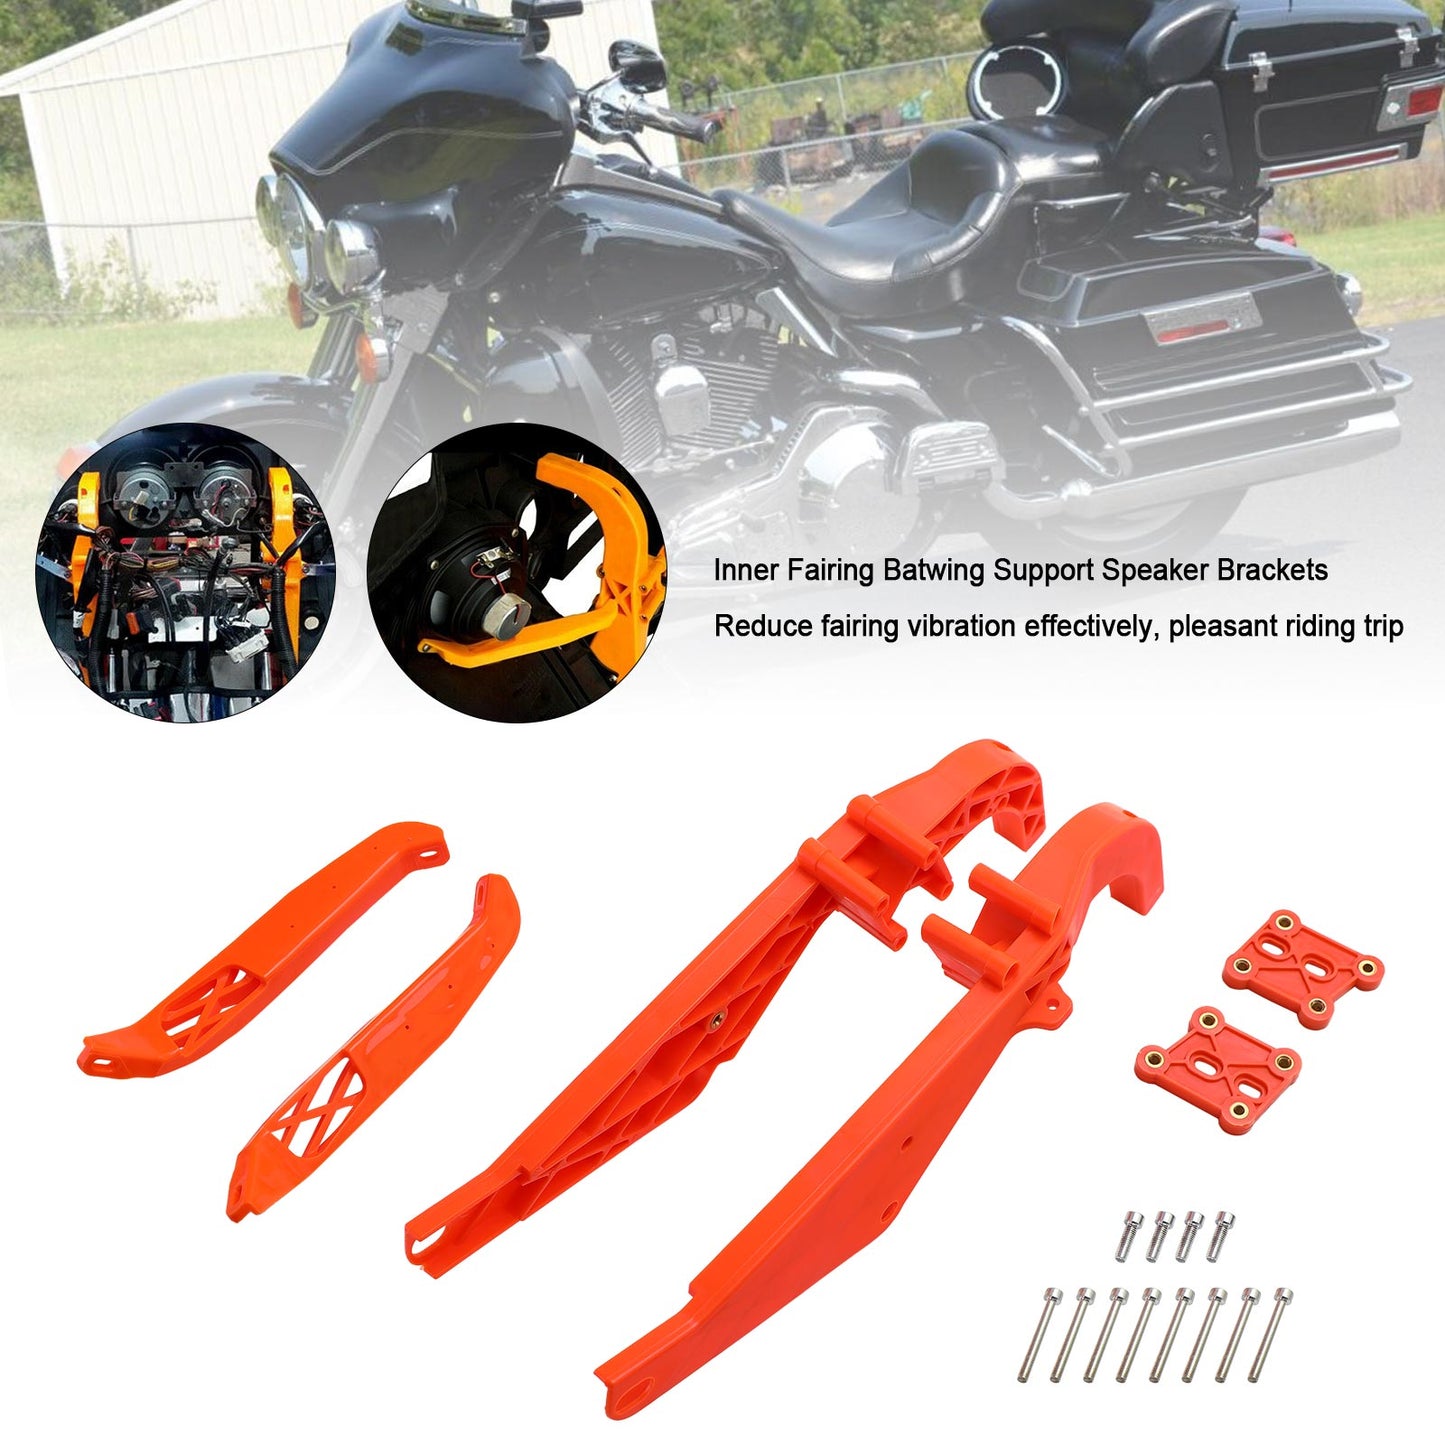 Inner Fairing Batwing Support Speaker Brackets For Touring Electra Glide 1996-2013